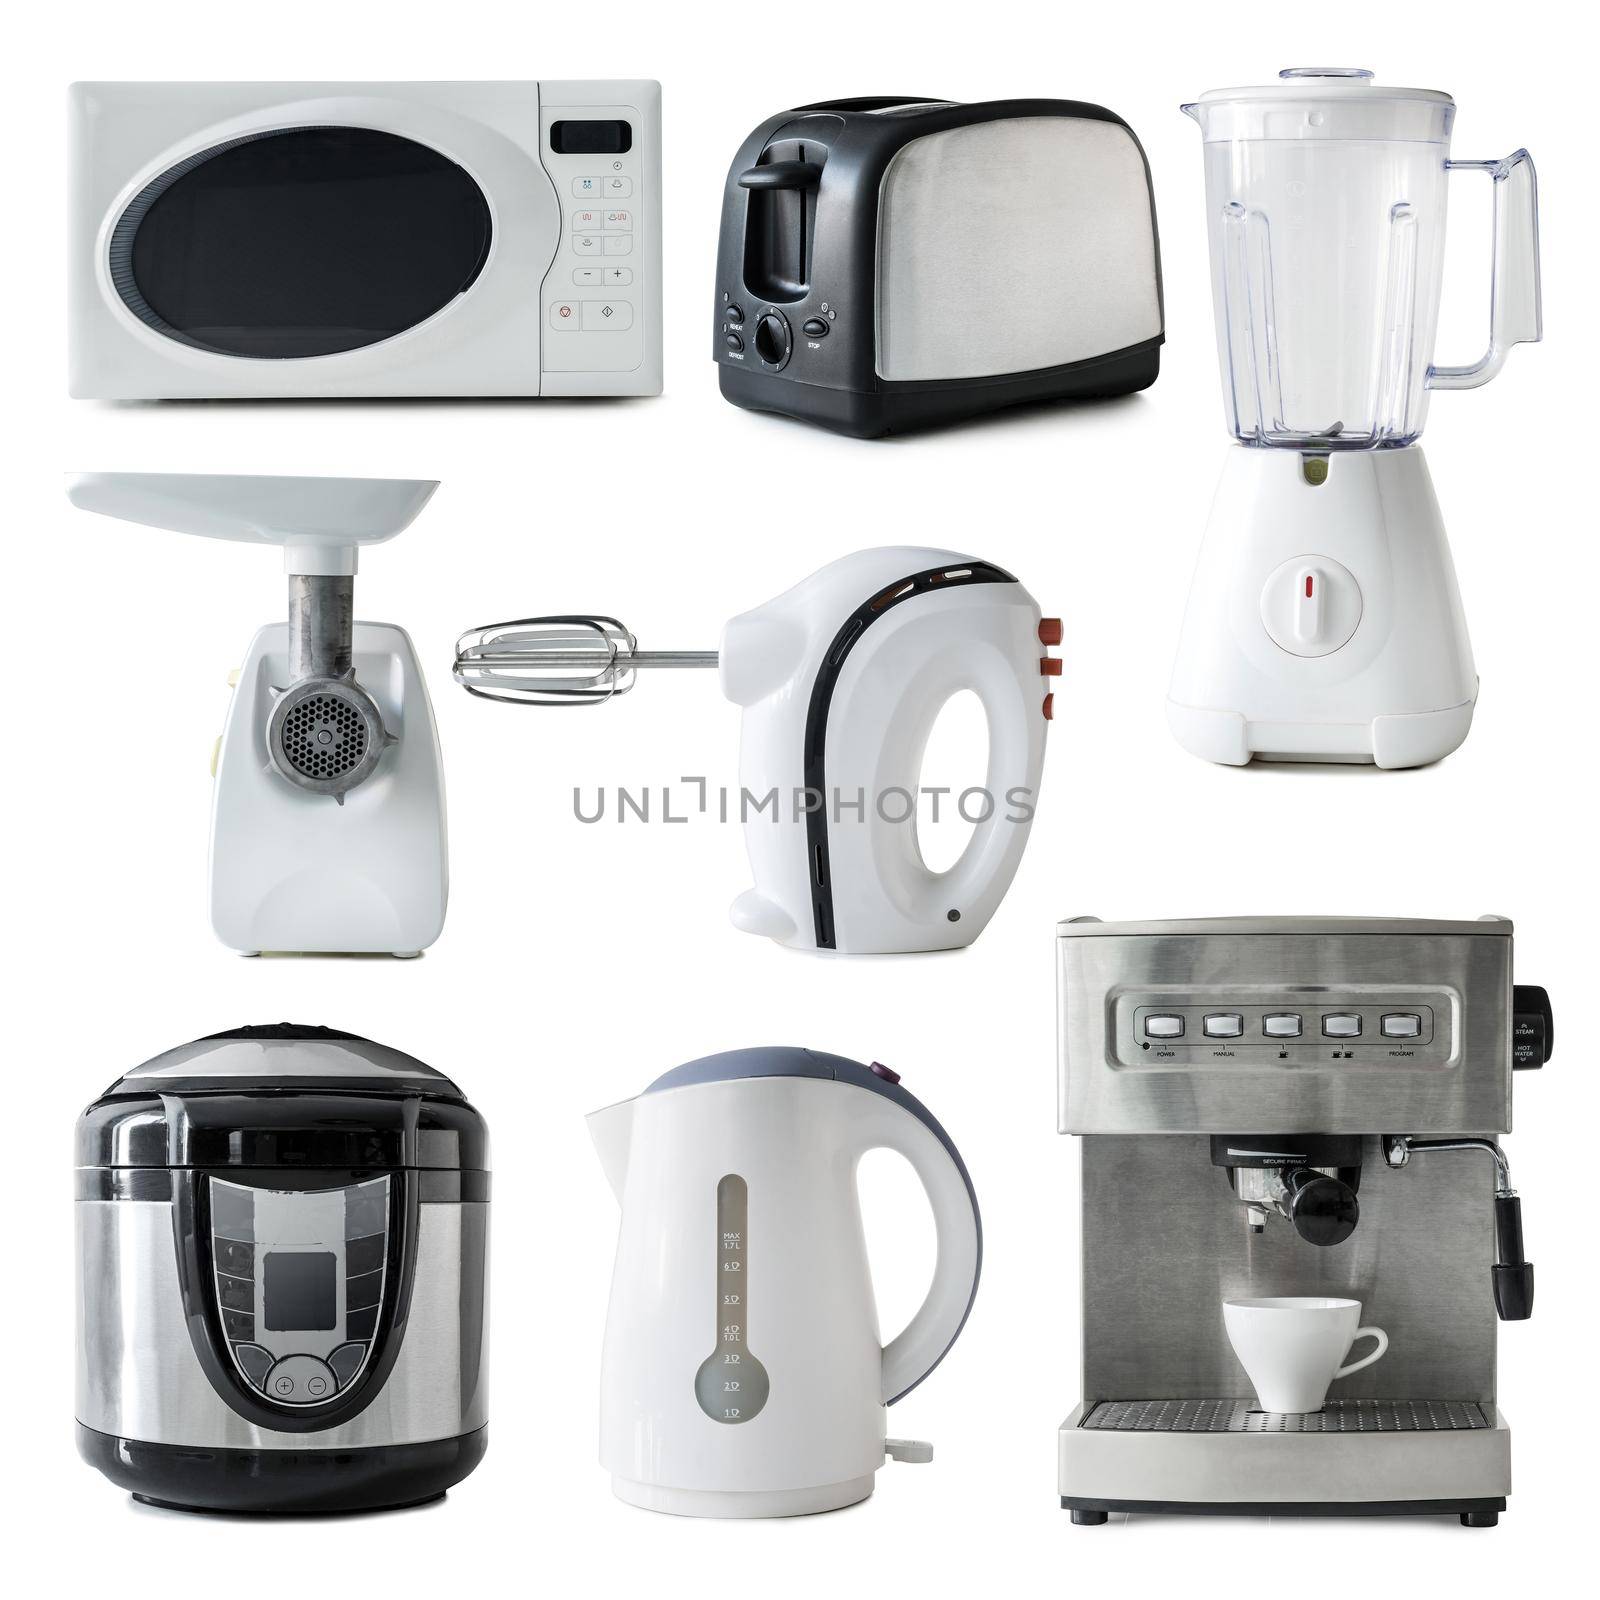 different types of kitchen appliances collage by tan4ikk1